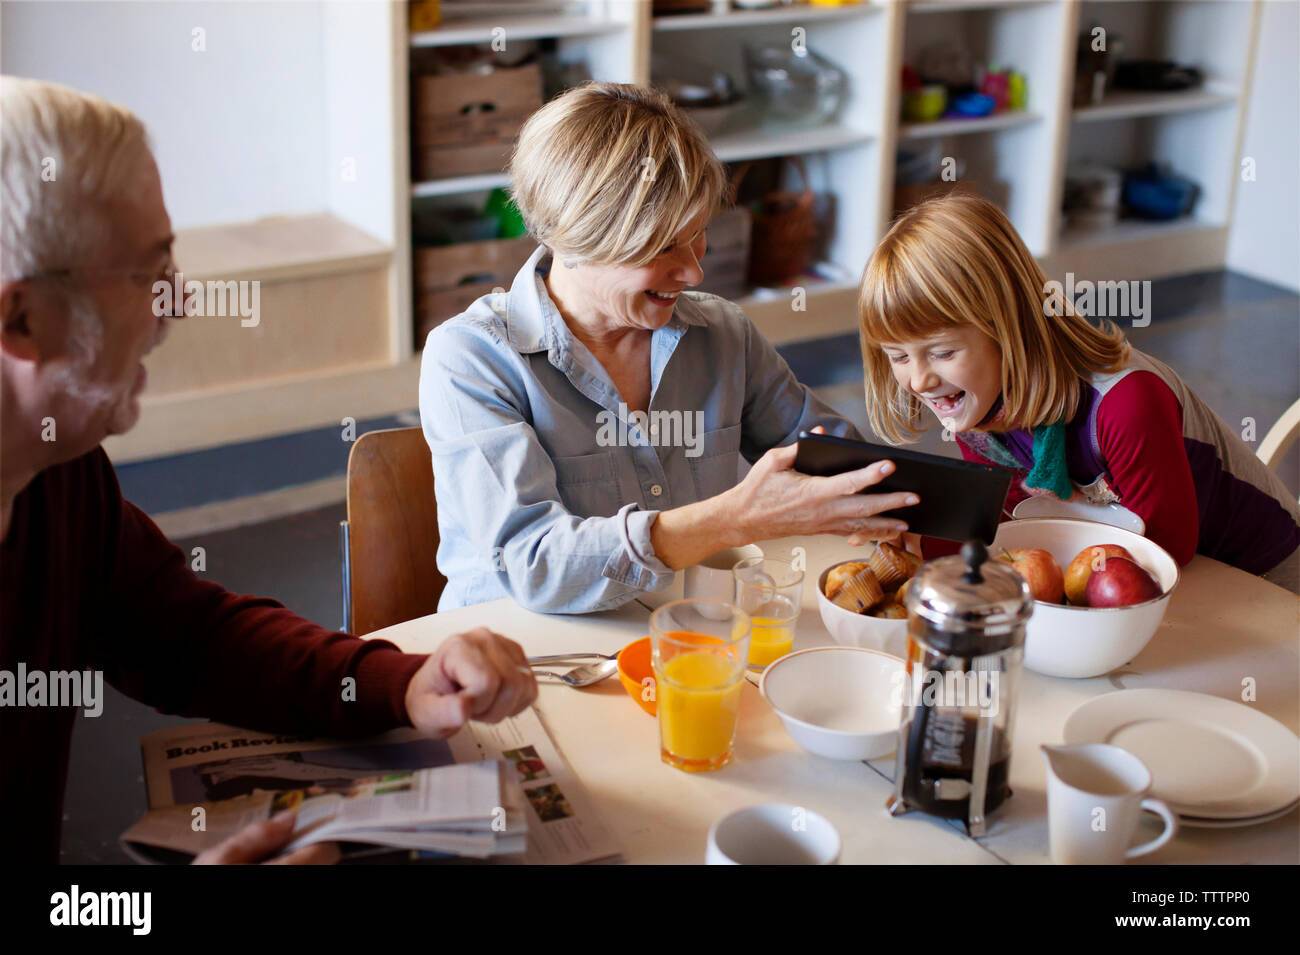 Man looking at wife showing tablet computer to granddaughter while sitting at table Stock Photo